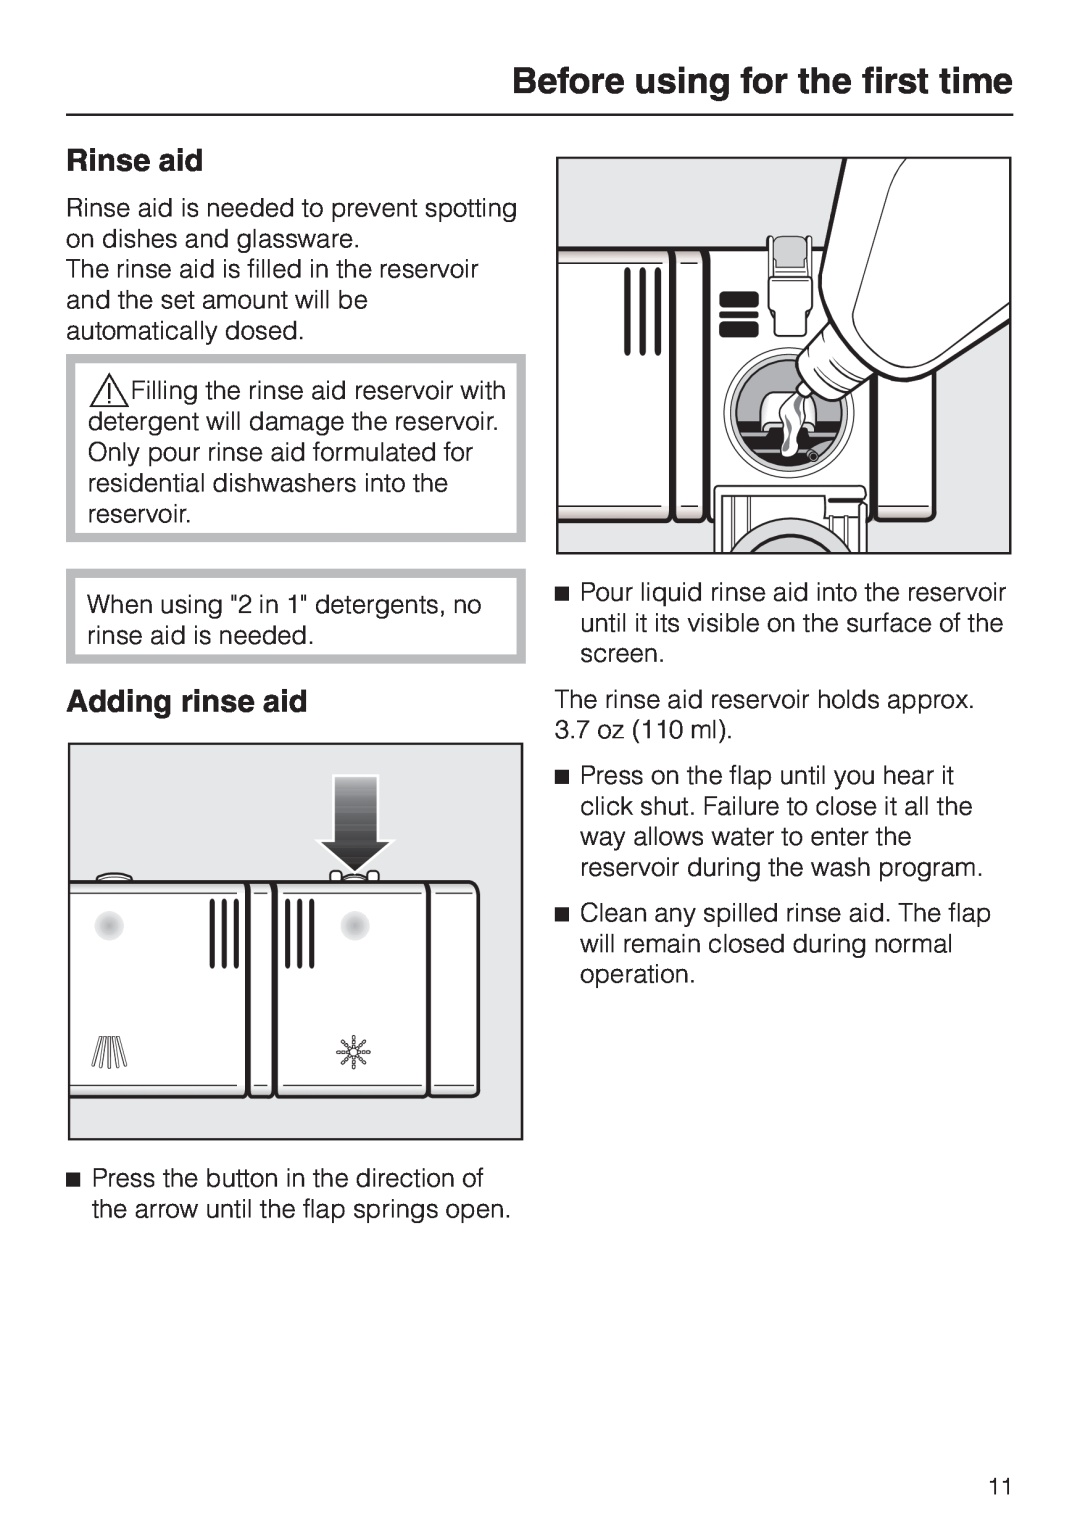 Miele G 2180, G 2170 operating instructions Rinse aid, Adding rinse aid, Before using for the first time 